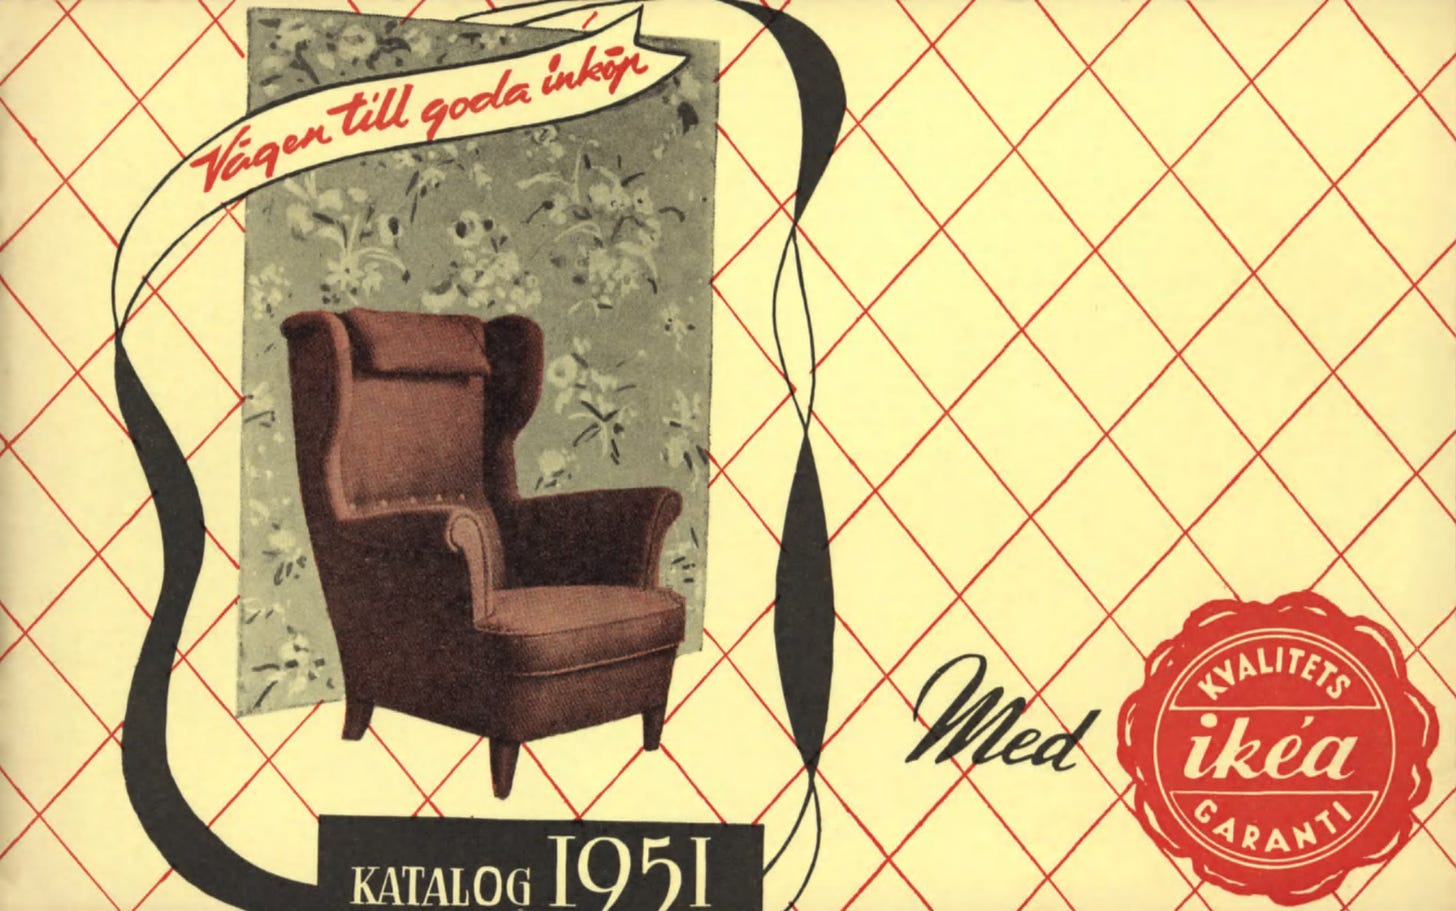 Brown high-back chair with floral patterened run in the background. Ikea logo and "Katalog 1951" in print.